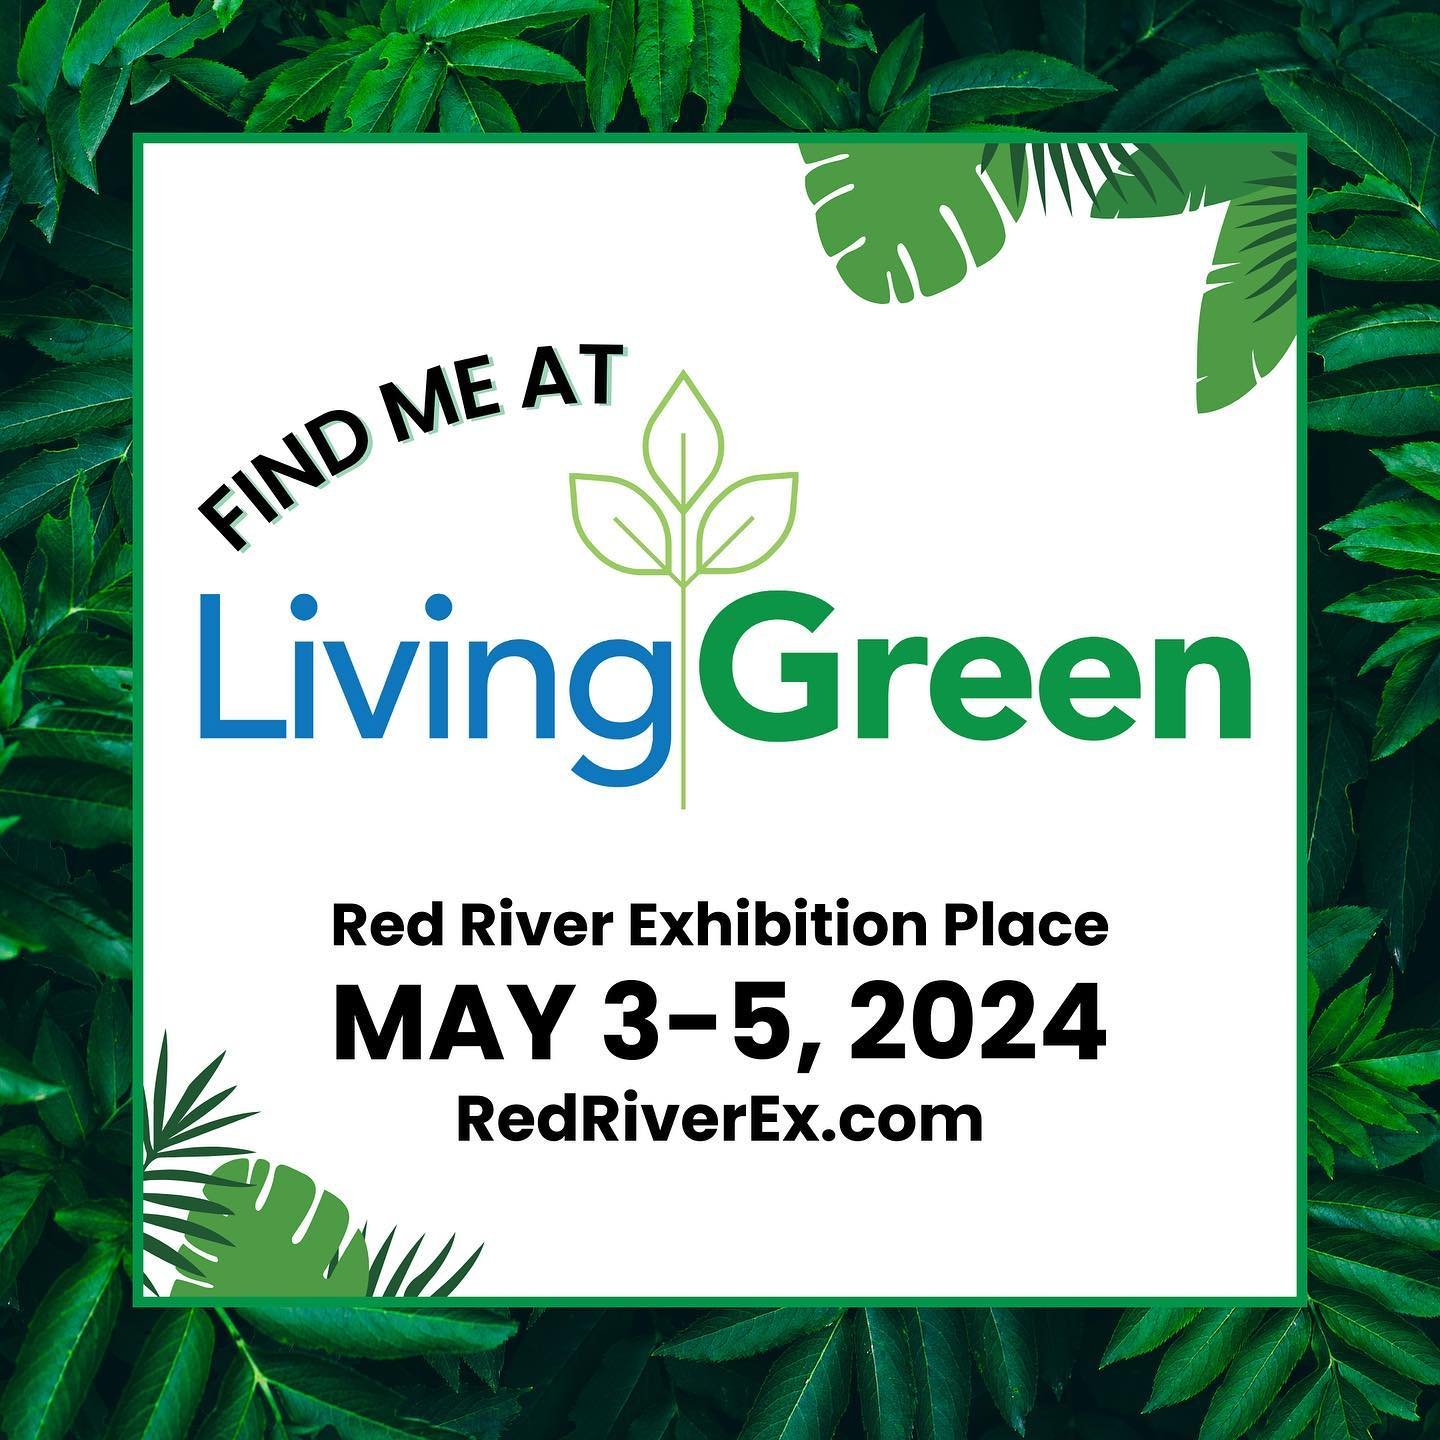 Attention all green thumbs! We&rsquo;re excited to announce that we will be at Living Green! Join us at Red River Exhibition Park from May 3 to 5 for a celebration of all things sustainable. Stop by our booth to grab some #mushroom growing kits for y